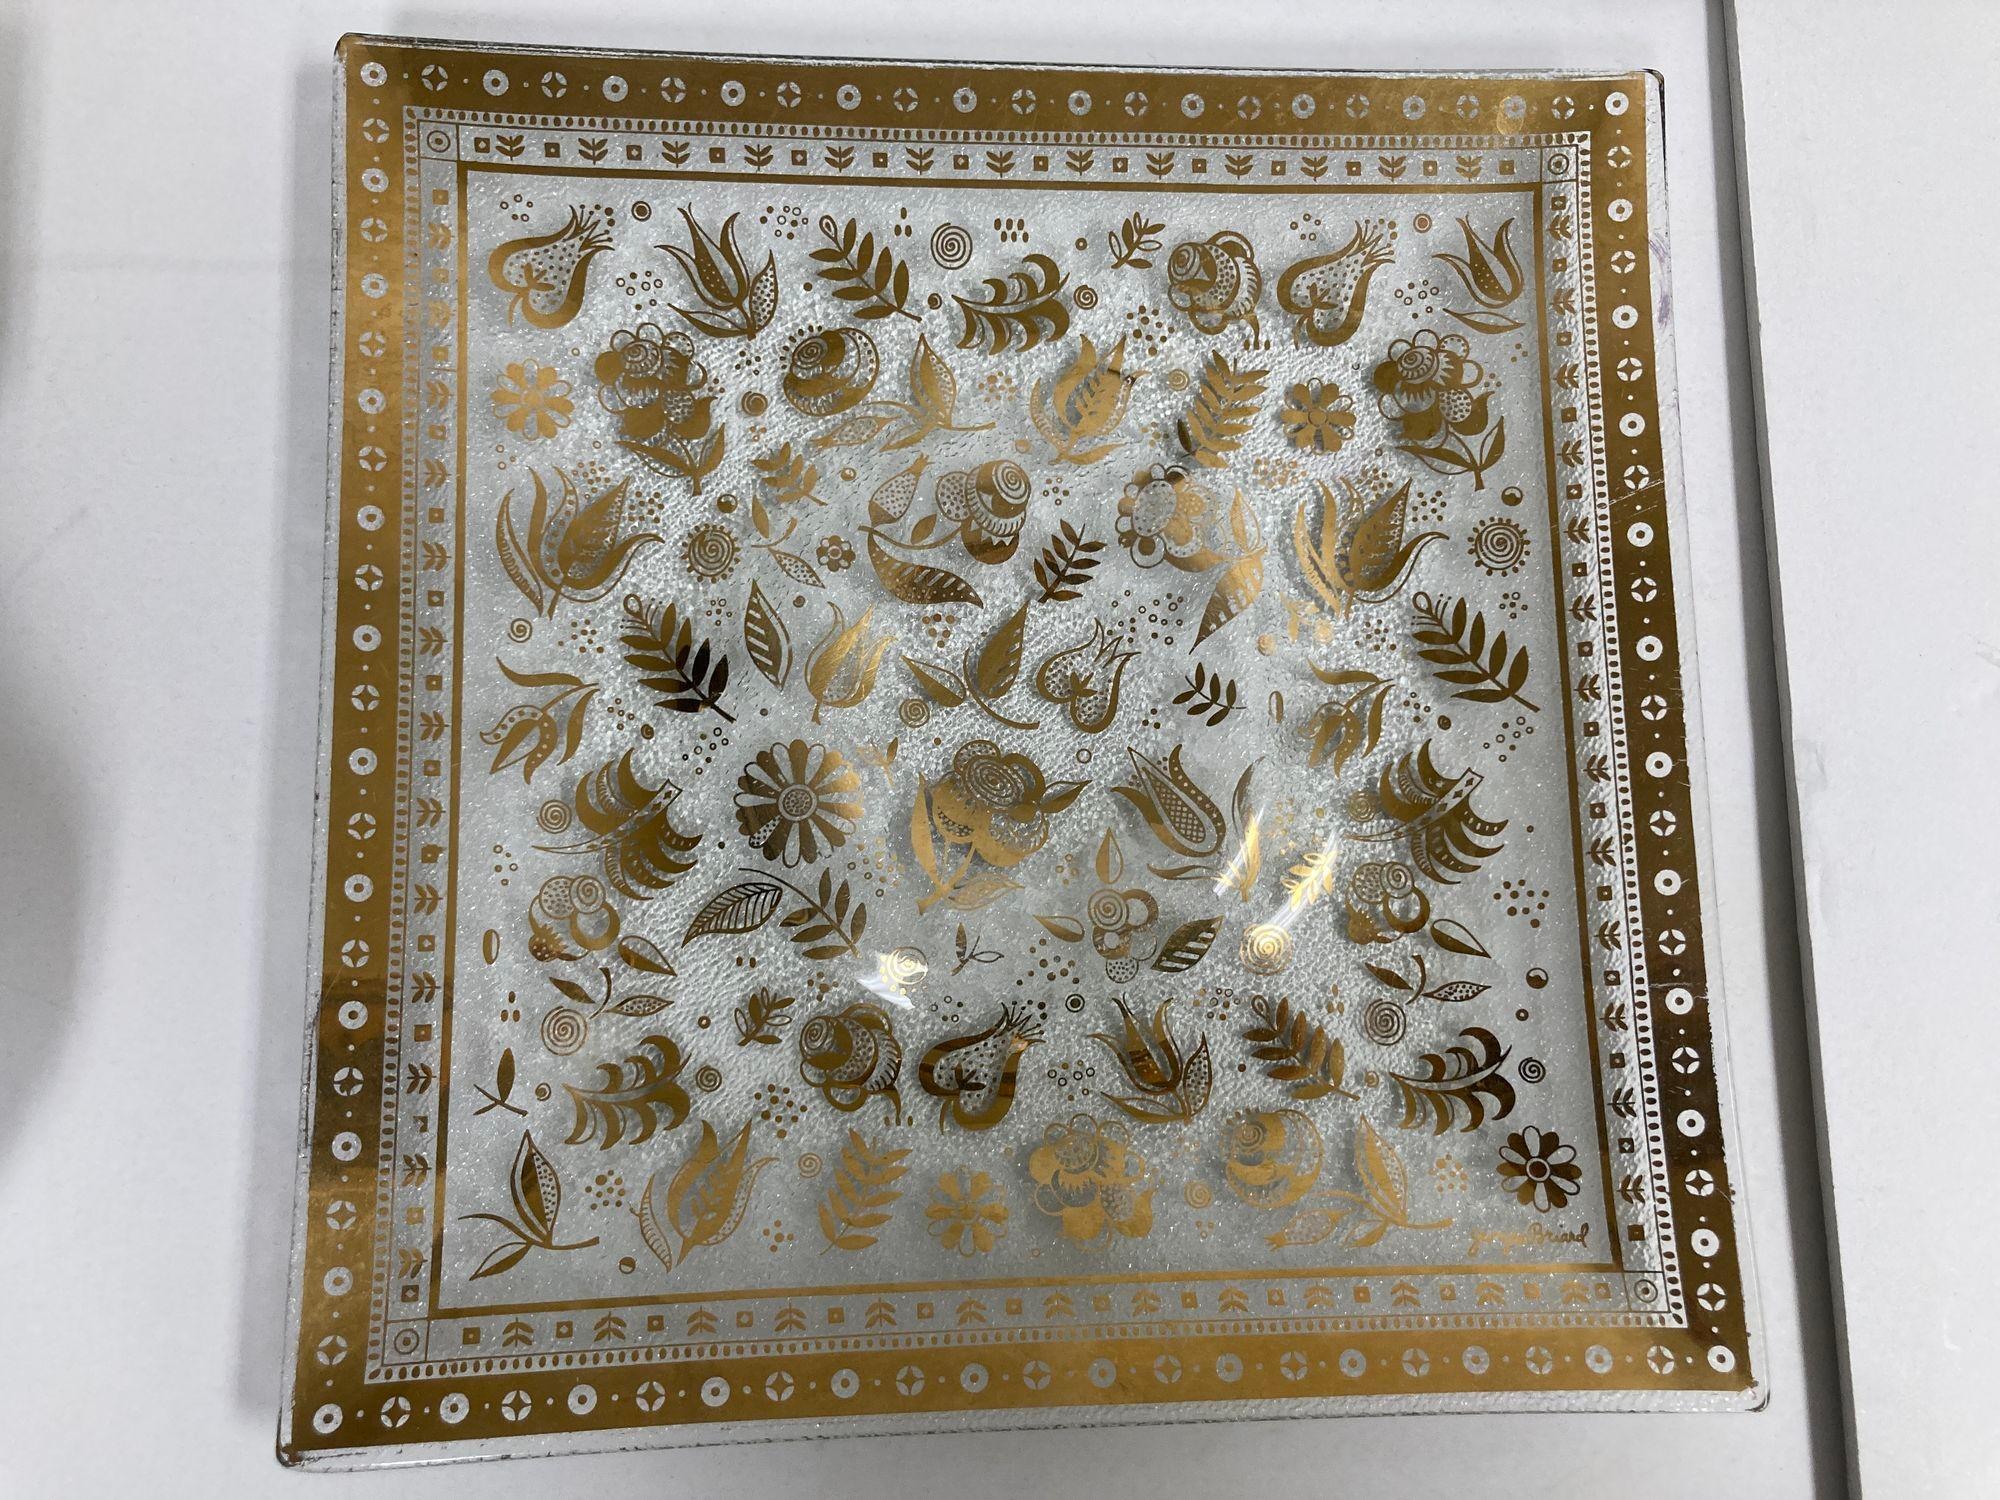 Hand-Crafted 1960s Georges Briard Bent Glass Tray Persian Garden Pattern Dish